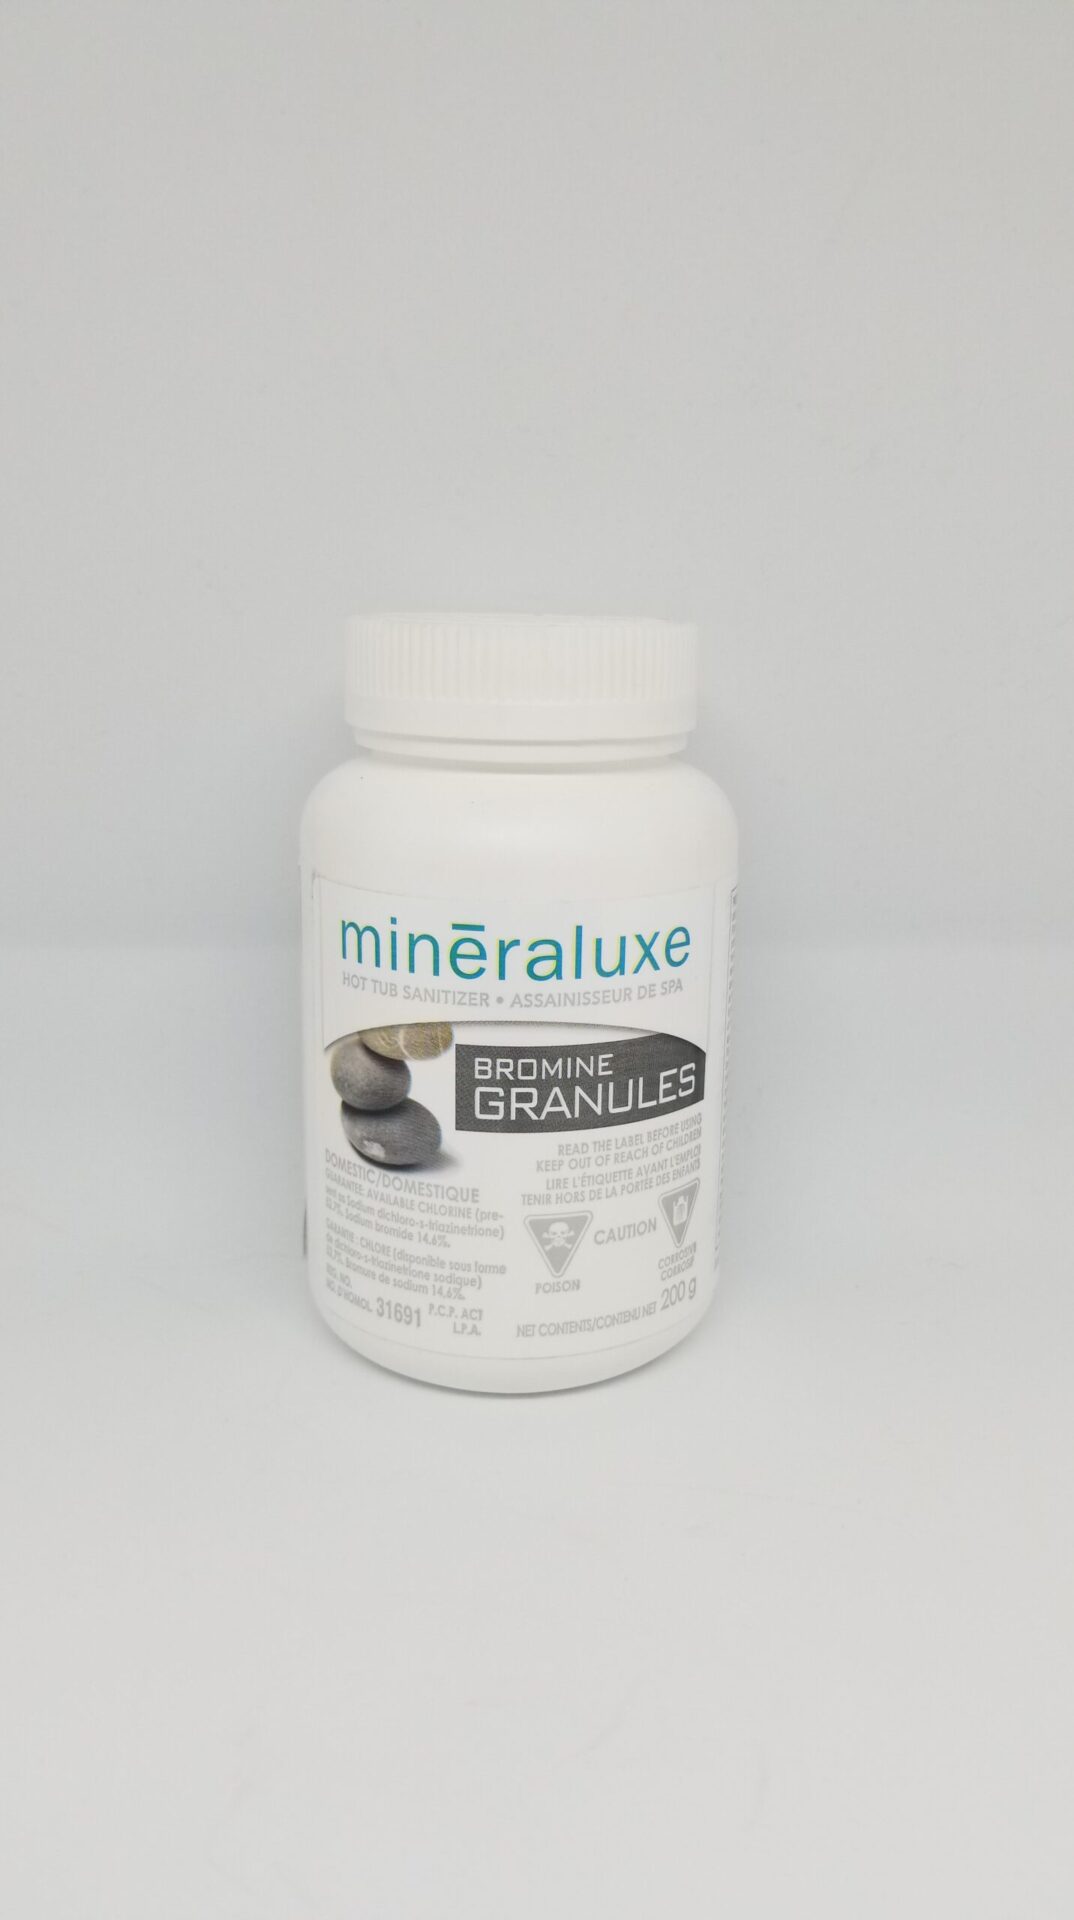 Mineraluxe Bromine Granules 200g scaled - Mineraluxe Bromine Granules 200g